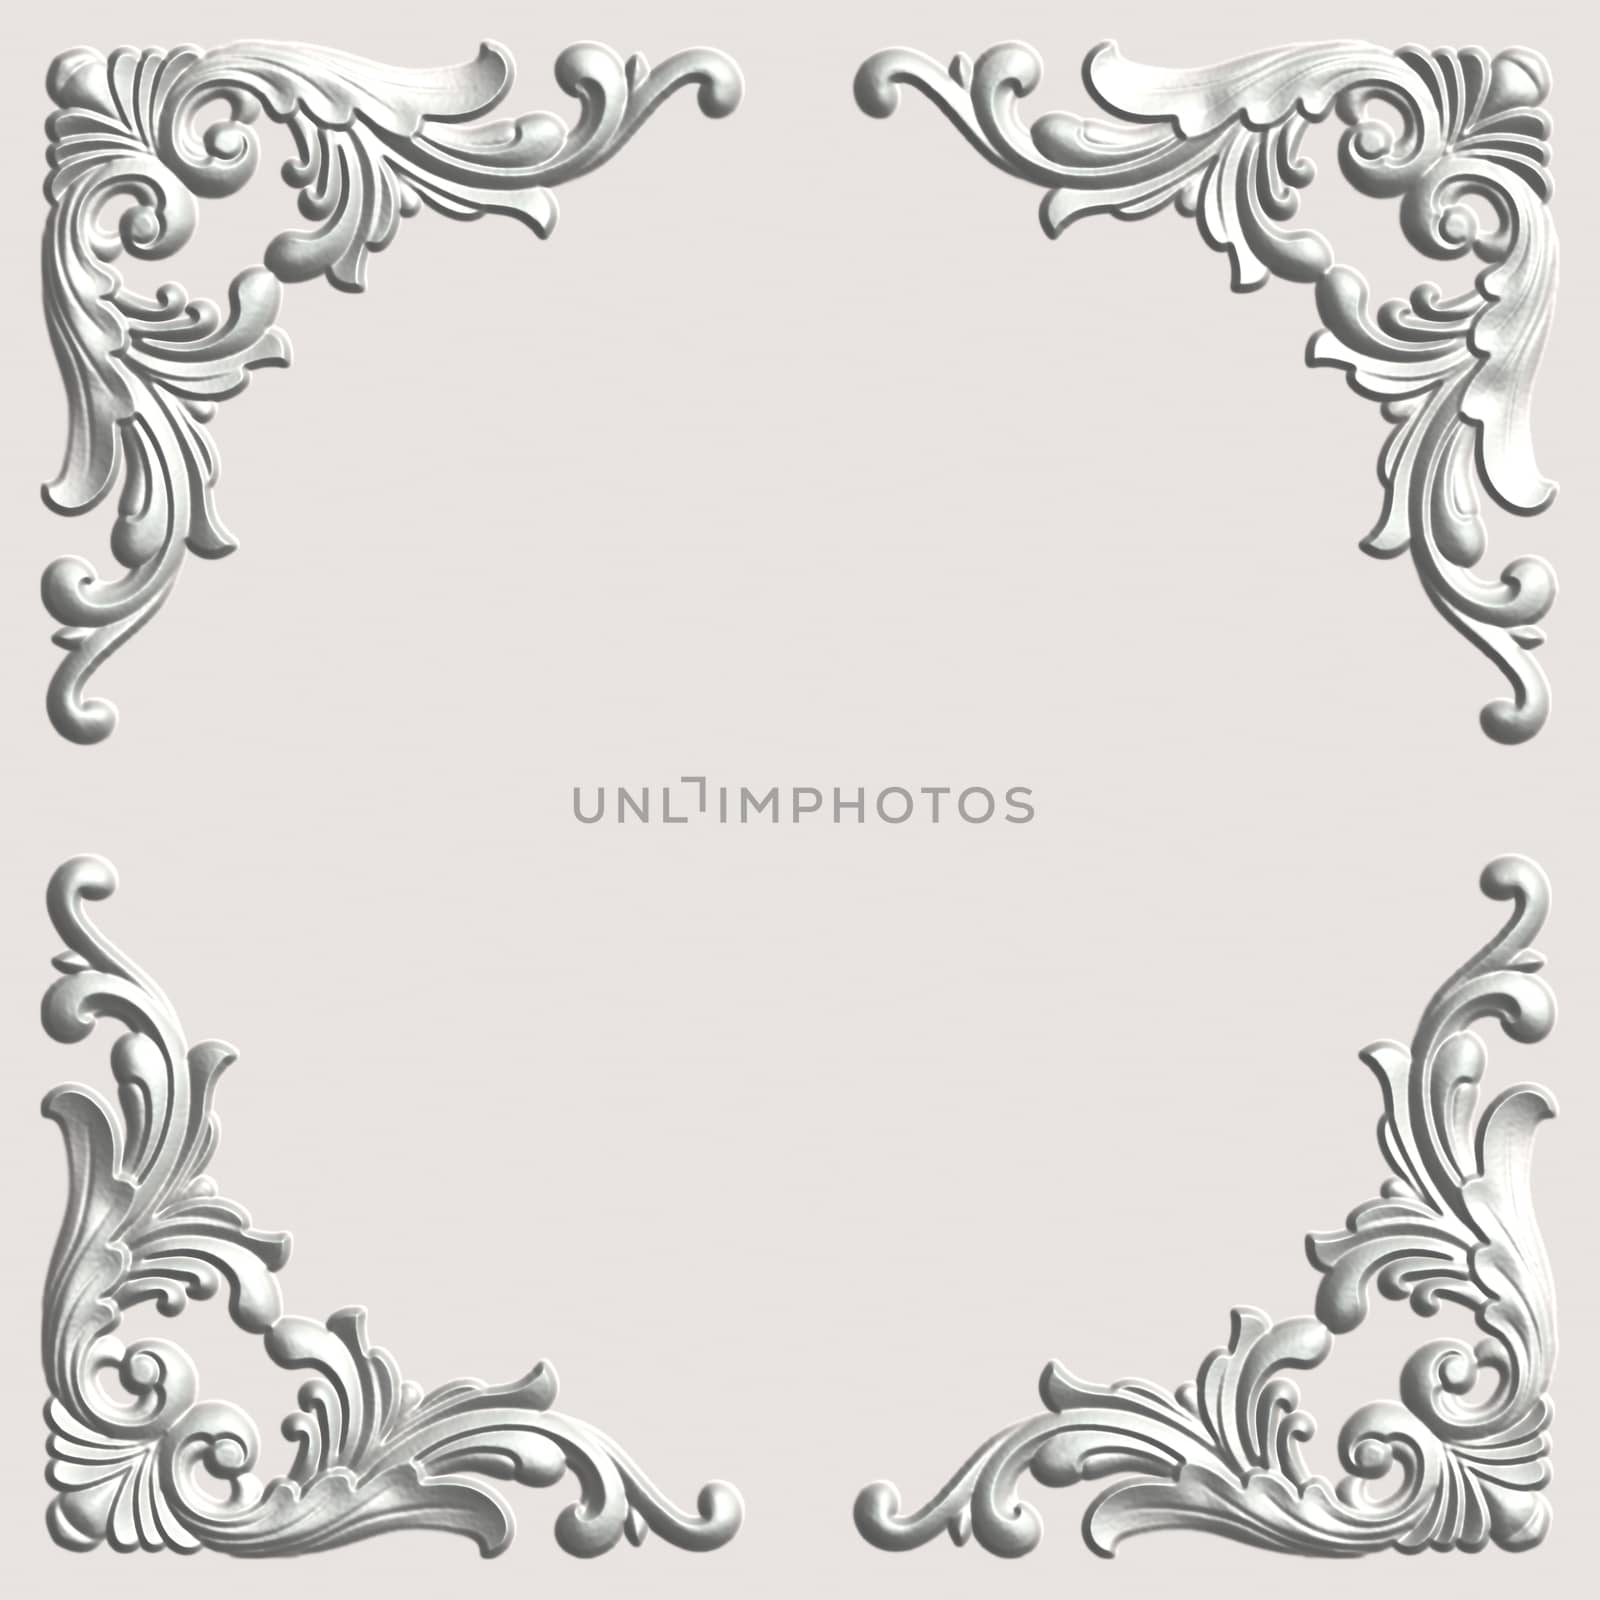 3d swirl floral luxury background decorative ornament white frame.